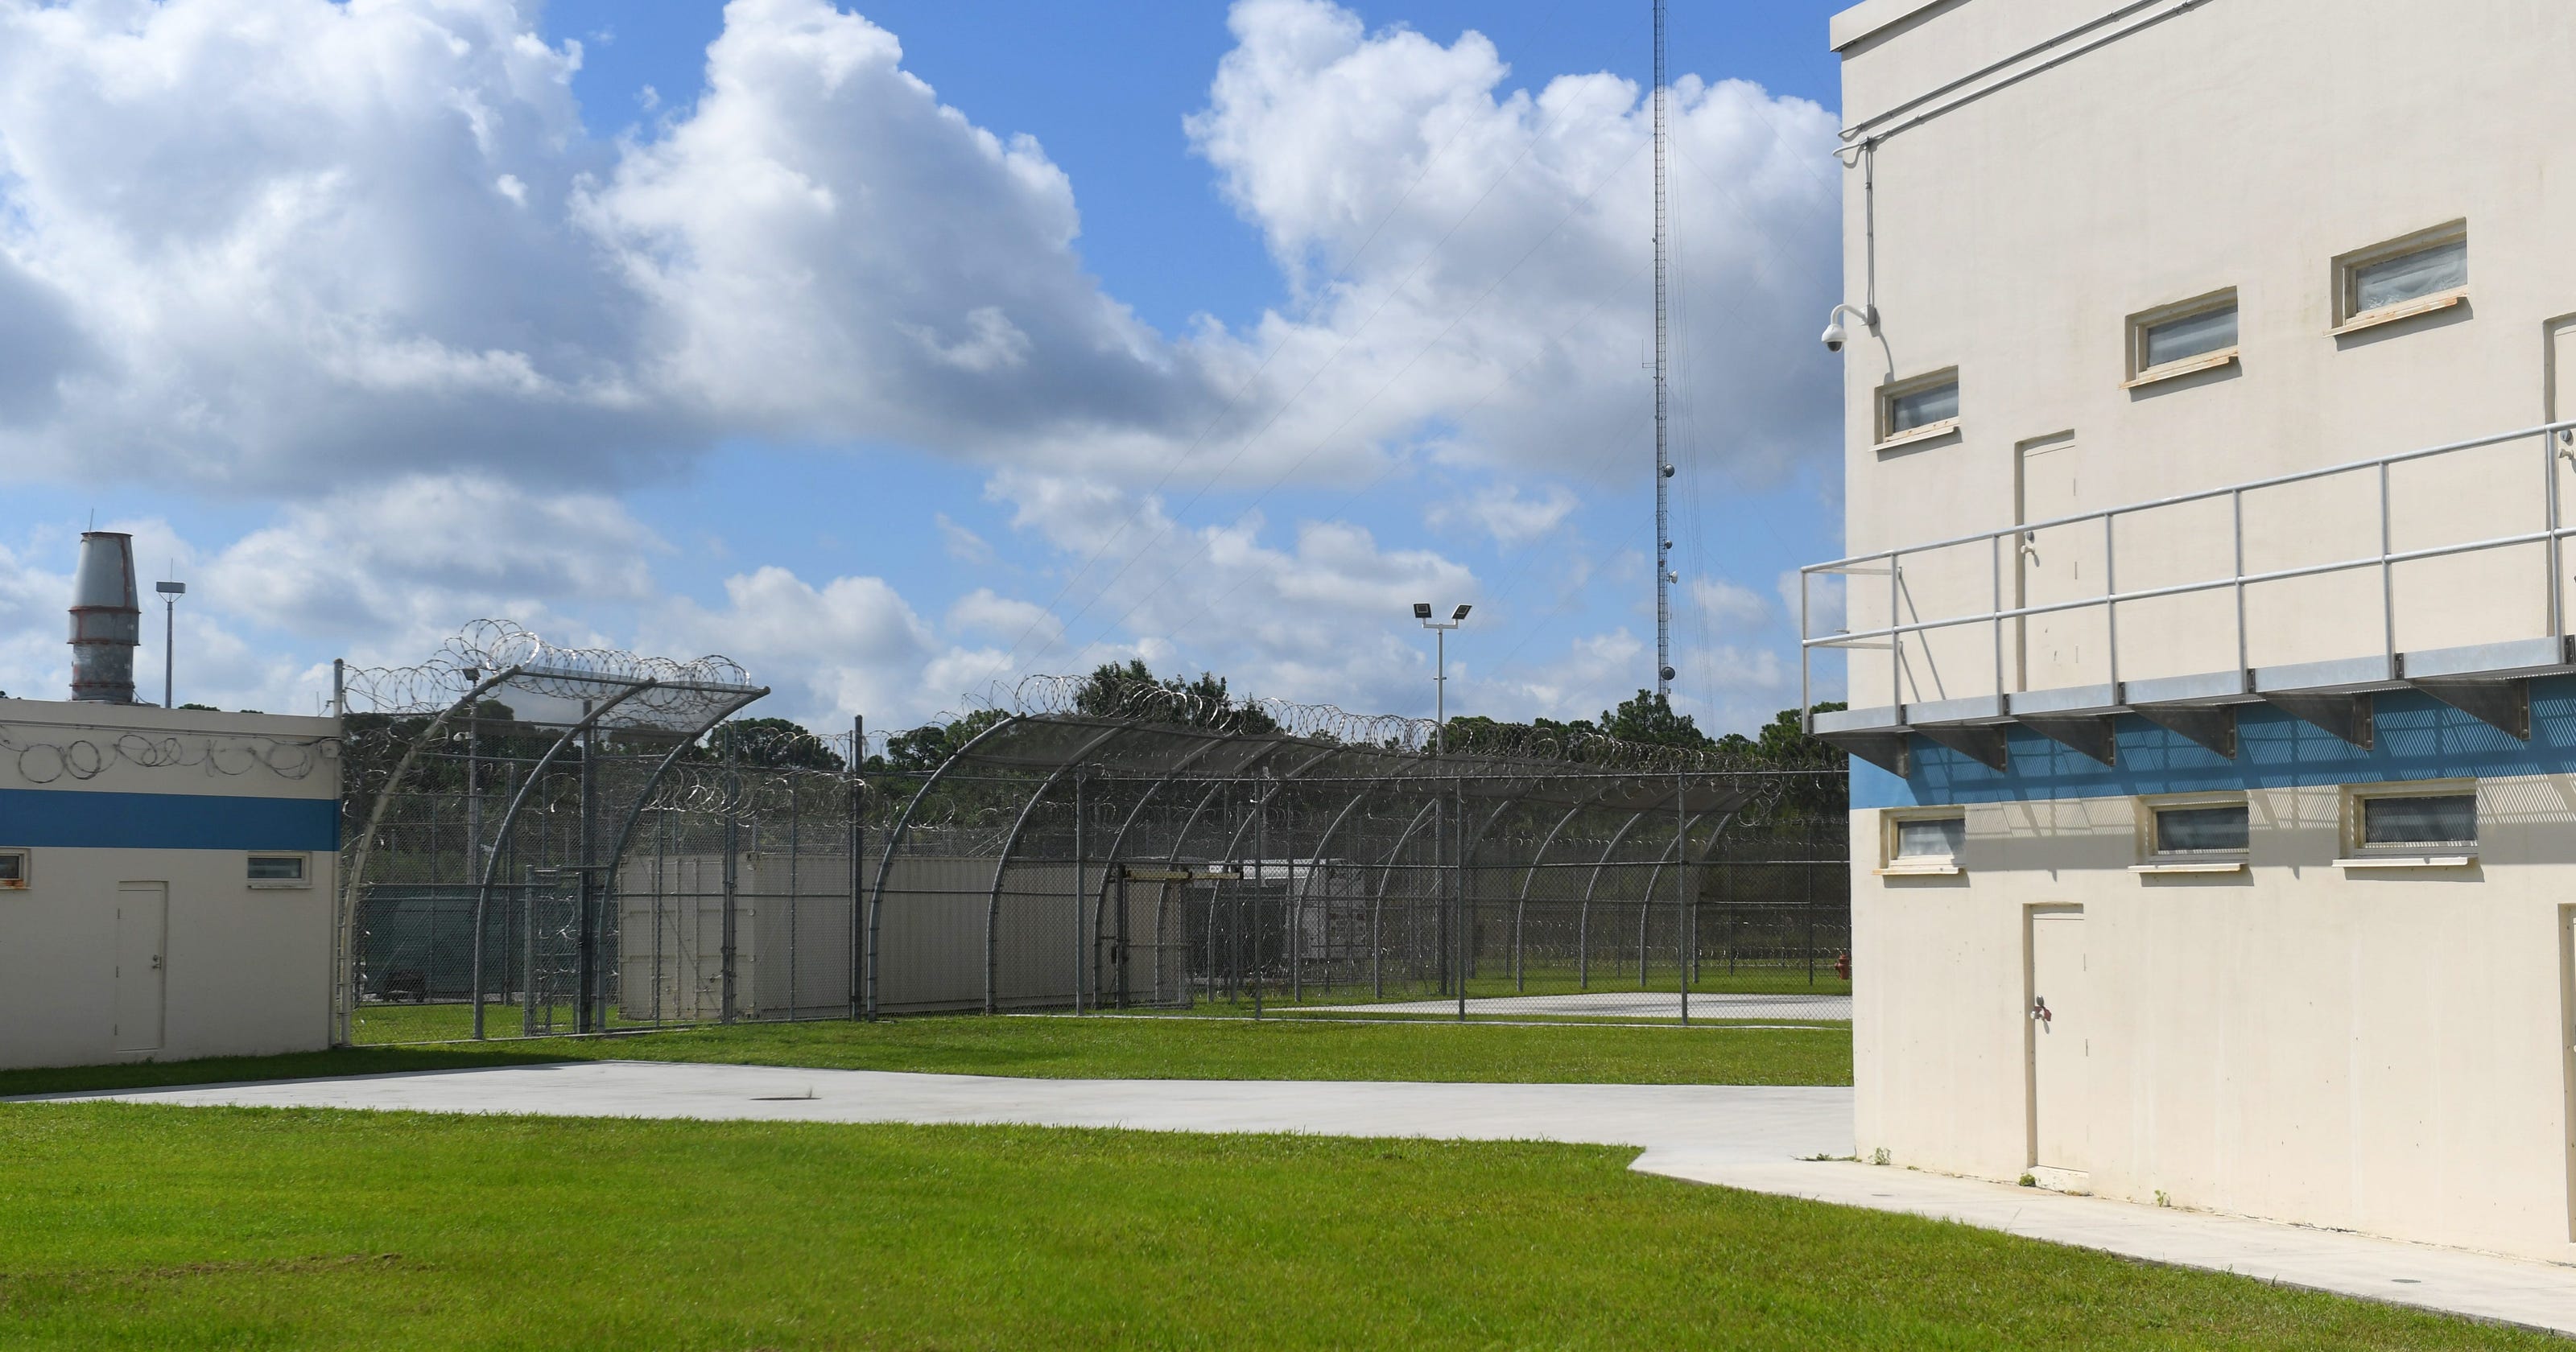 More COVID-19 cases in St. Lucie County jail